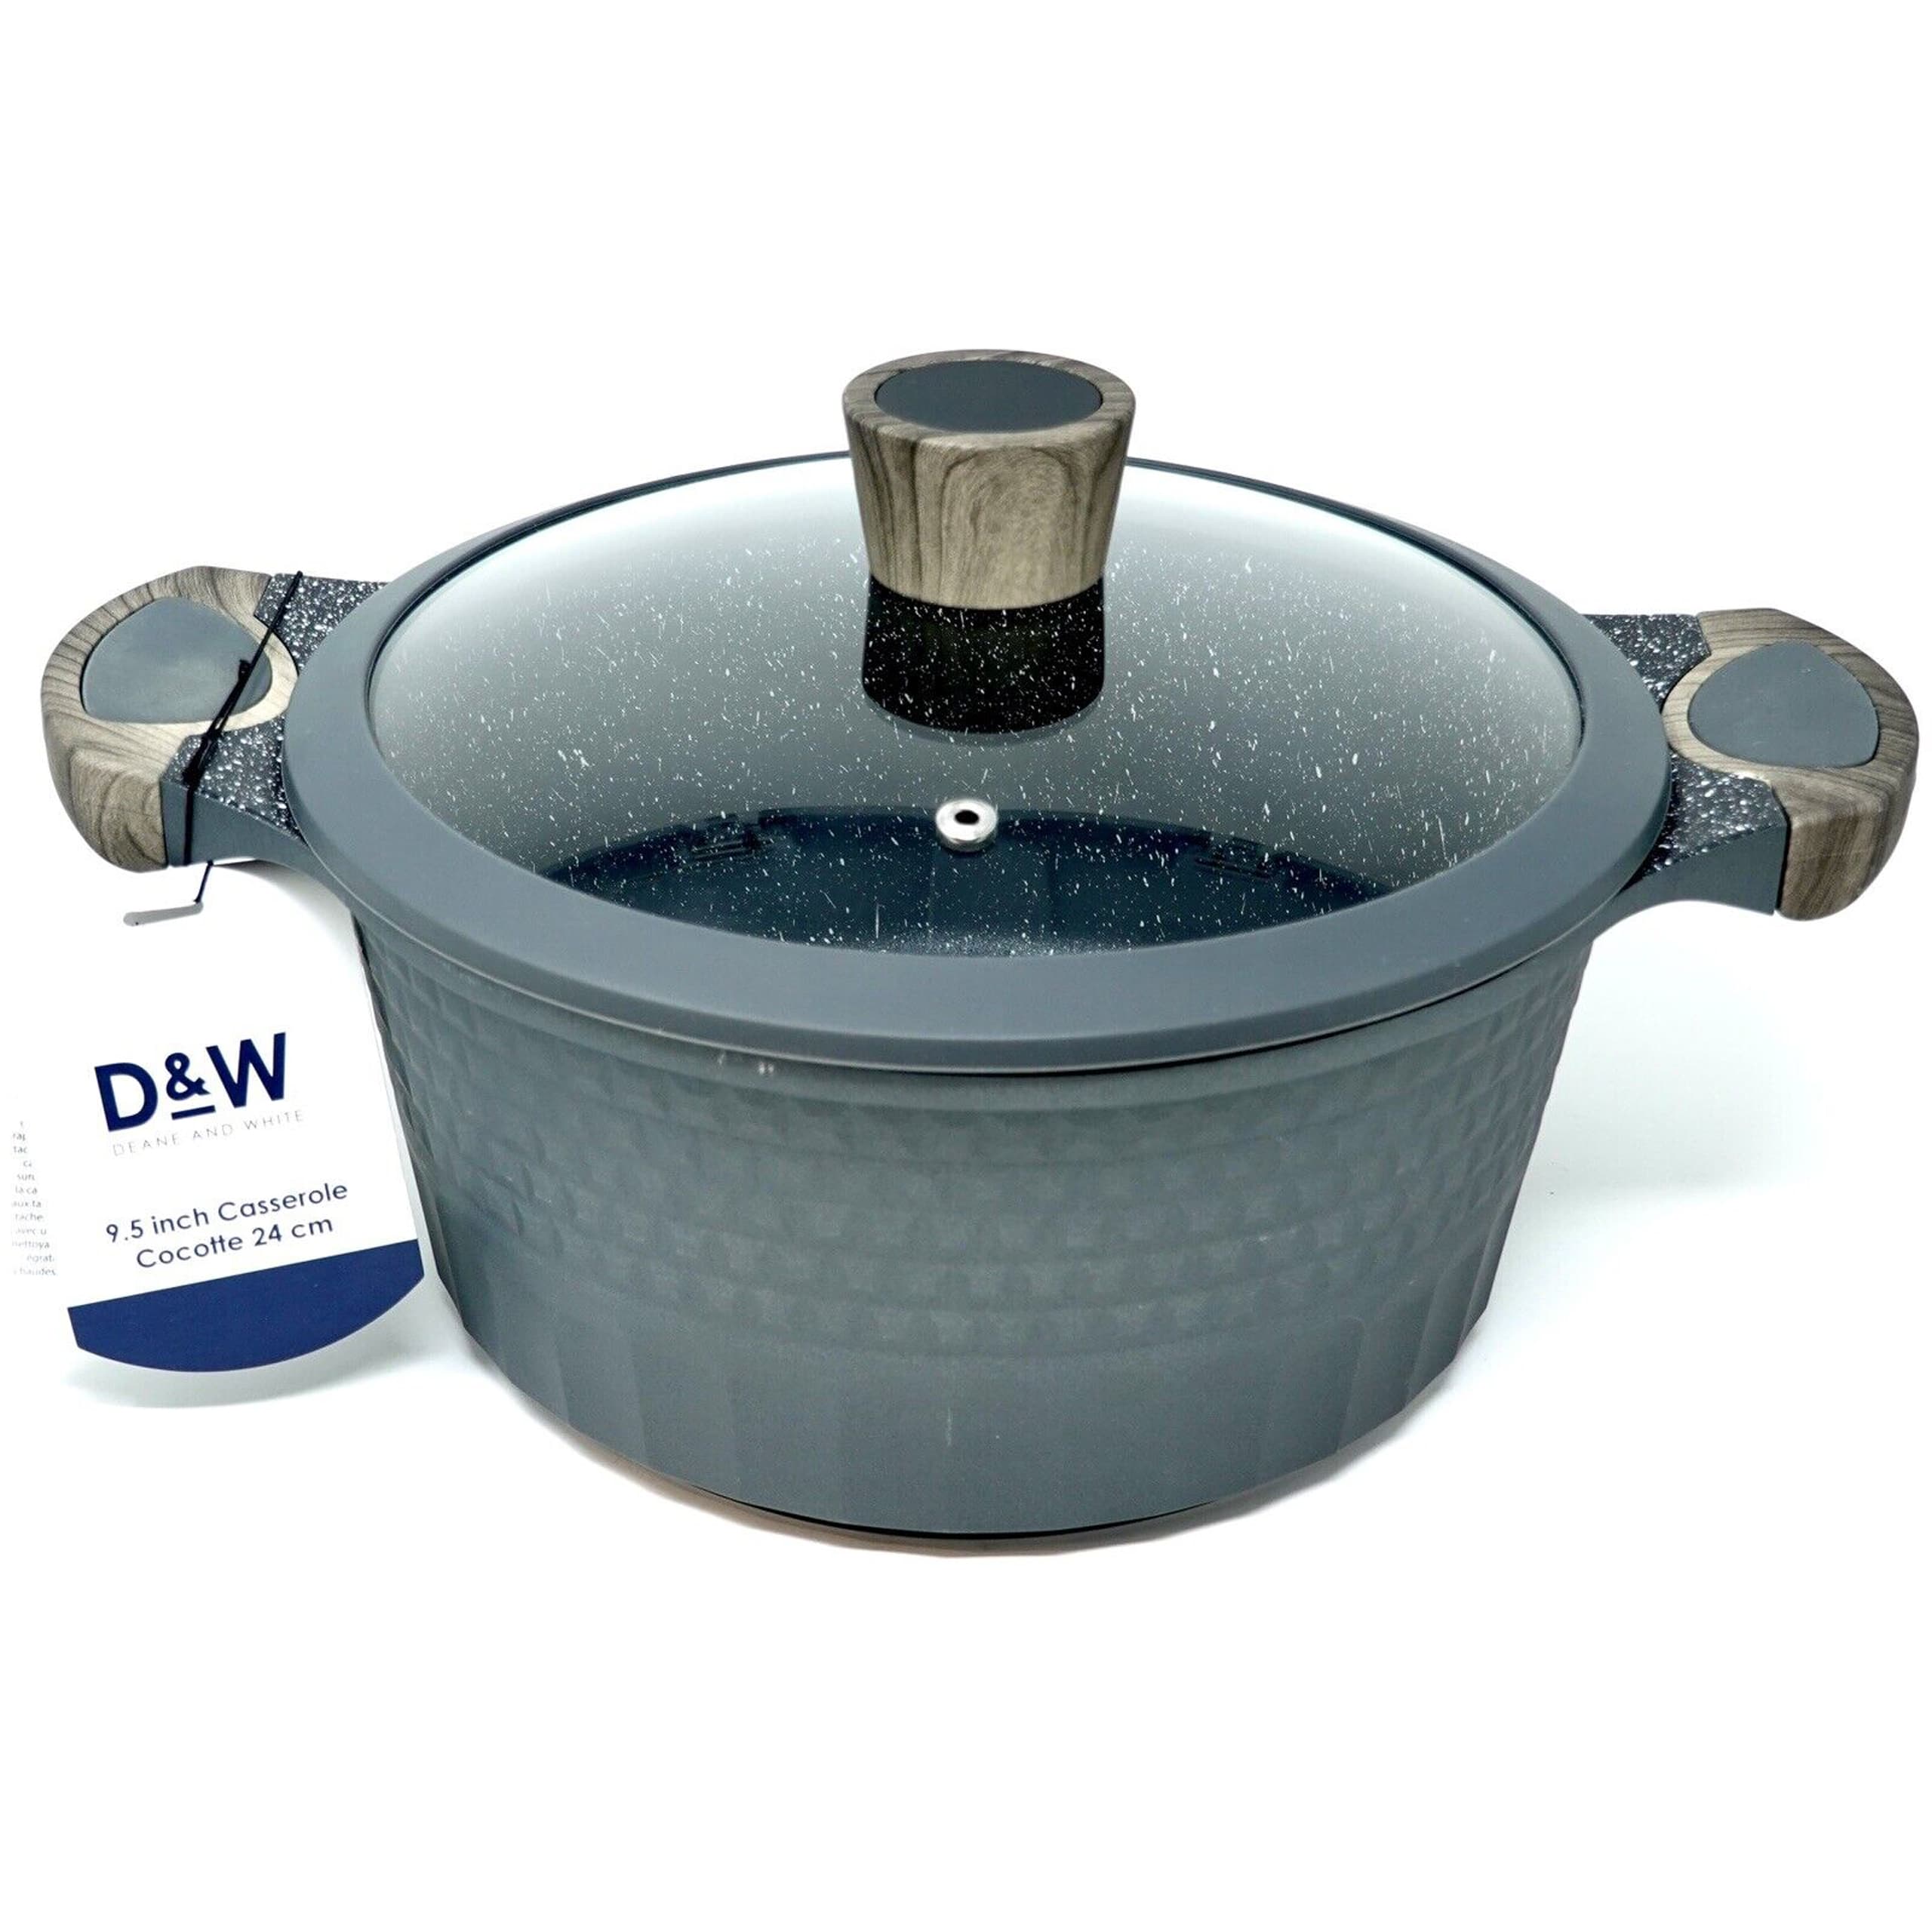 D&W 9.5 Pot Casserole Cocotte (5 deep) With Glass Lid - Deane and White  Cookware